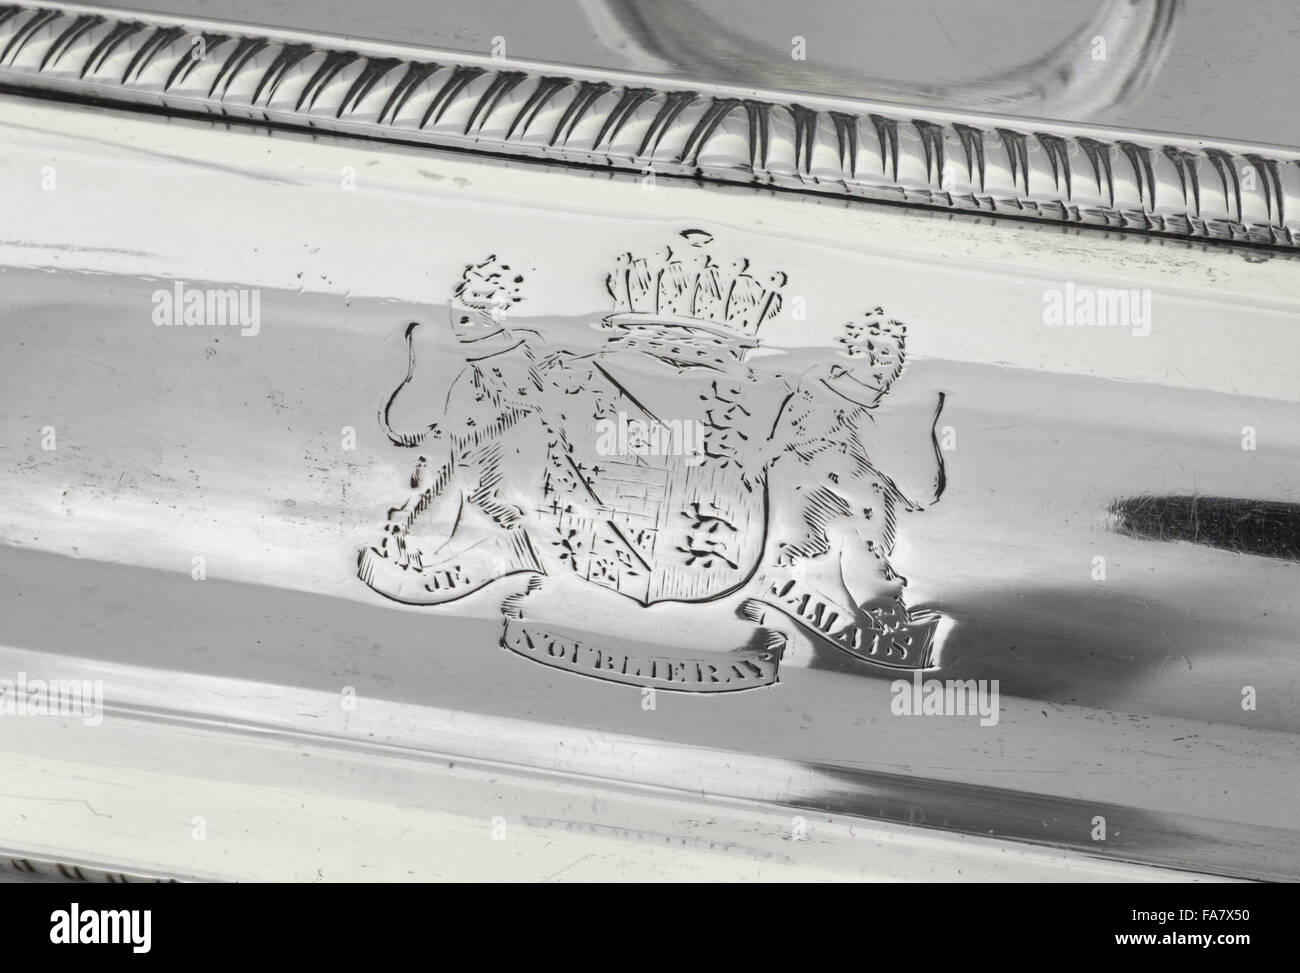 Crest on an entree dish, 1802, by Richard Cooke, part of the silver collection at Ickworth, Suffolk. National Trust inventory number: 852190 Stock Photo